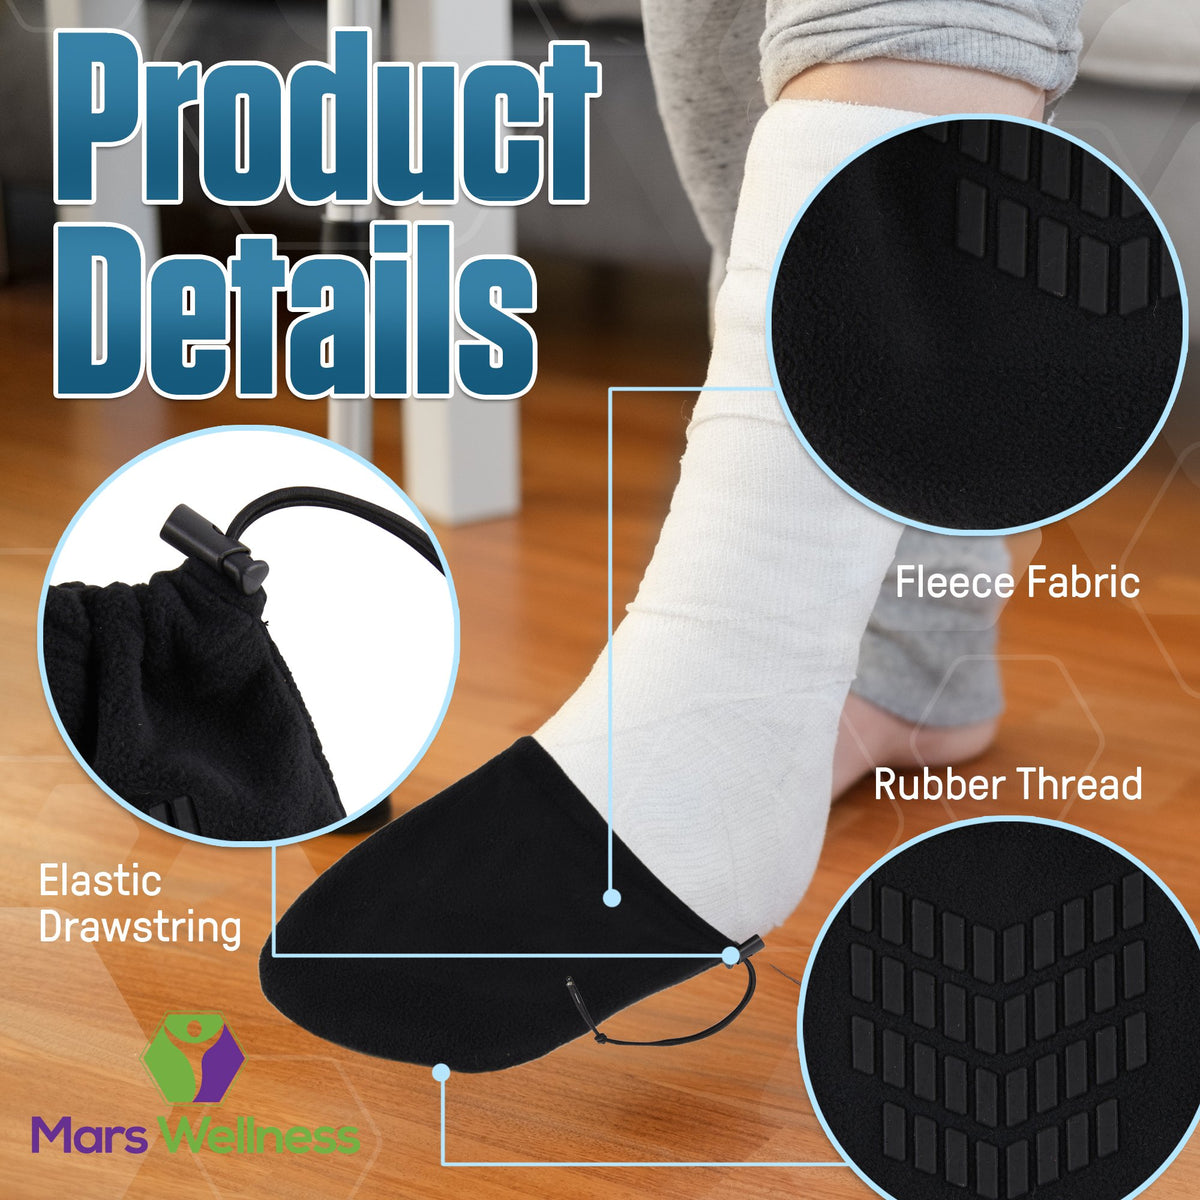 Premium Cast Sock Toe Cover - Fits Leg, Ankle, and Foot Casts